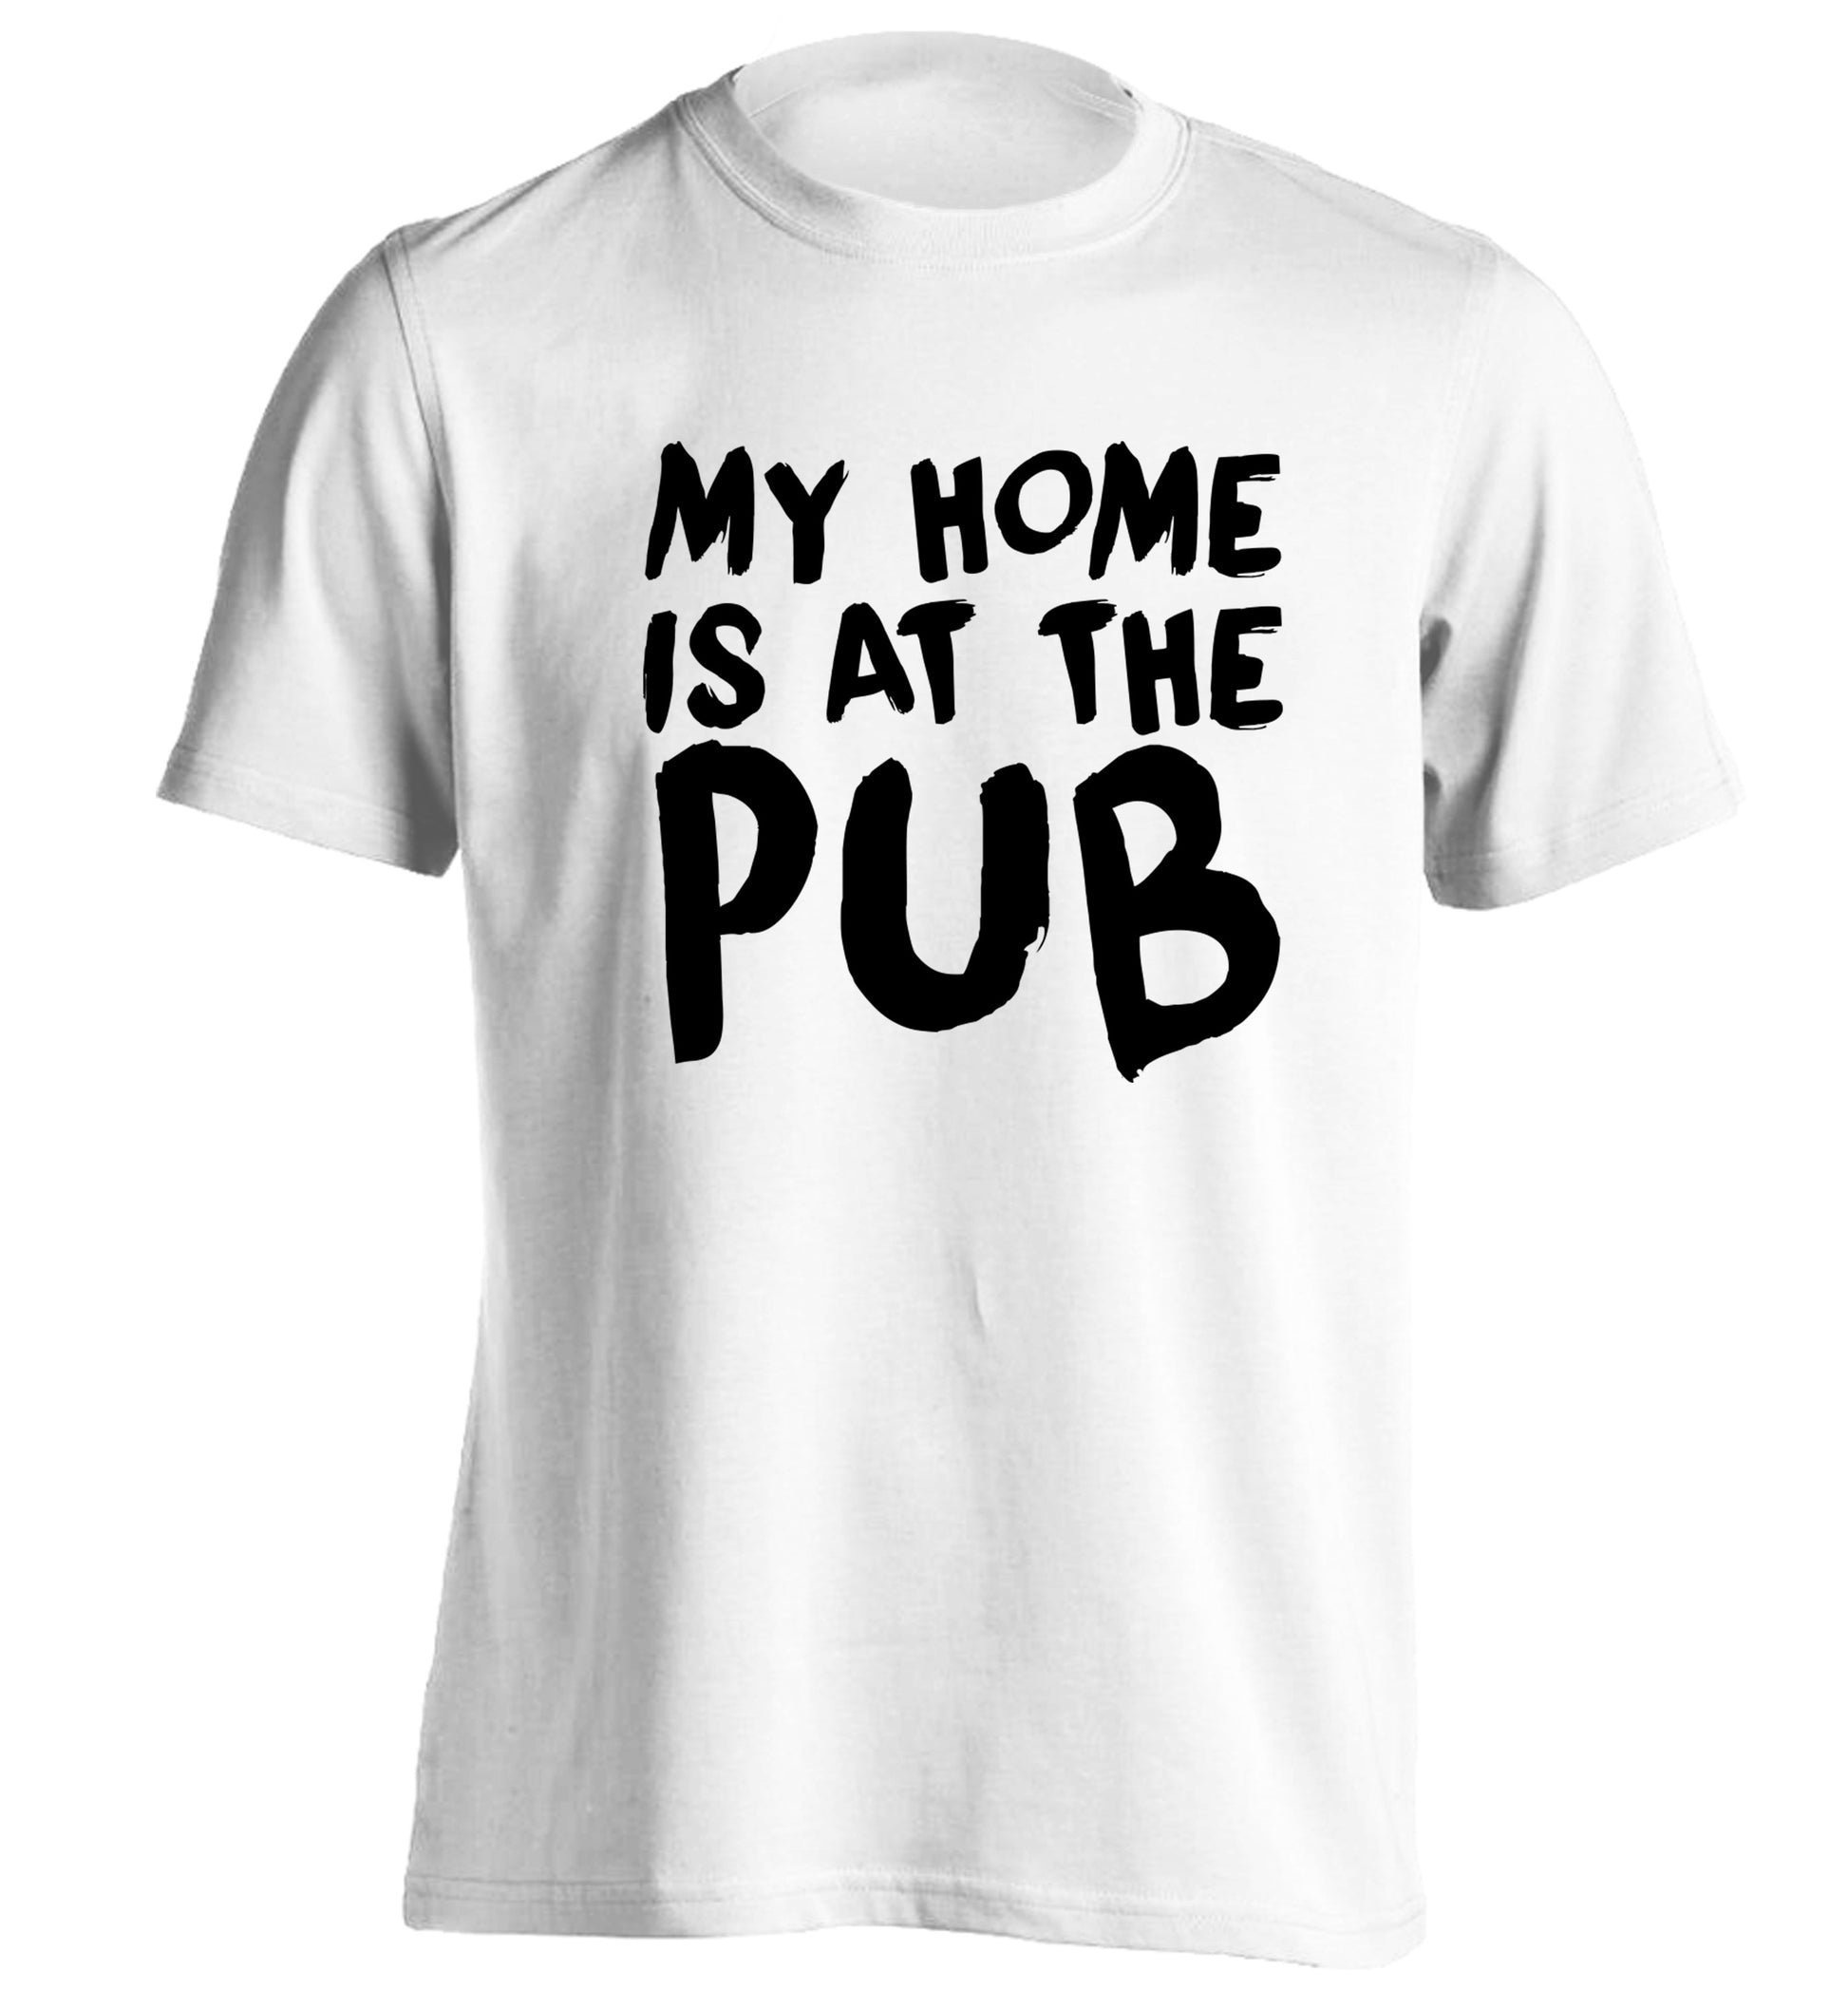 My home is at the pub adults unisex white Tshirt 2XL